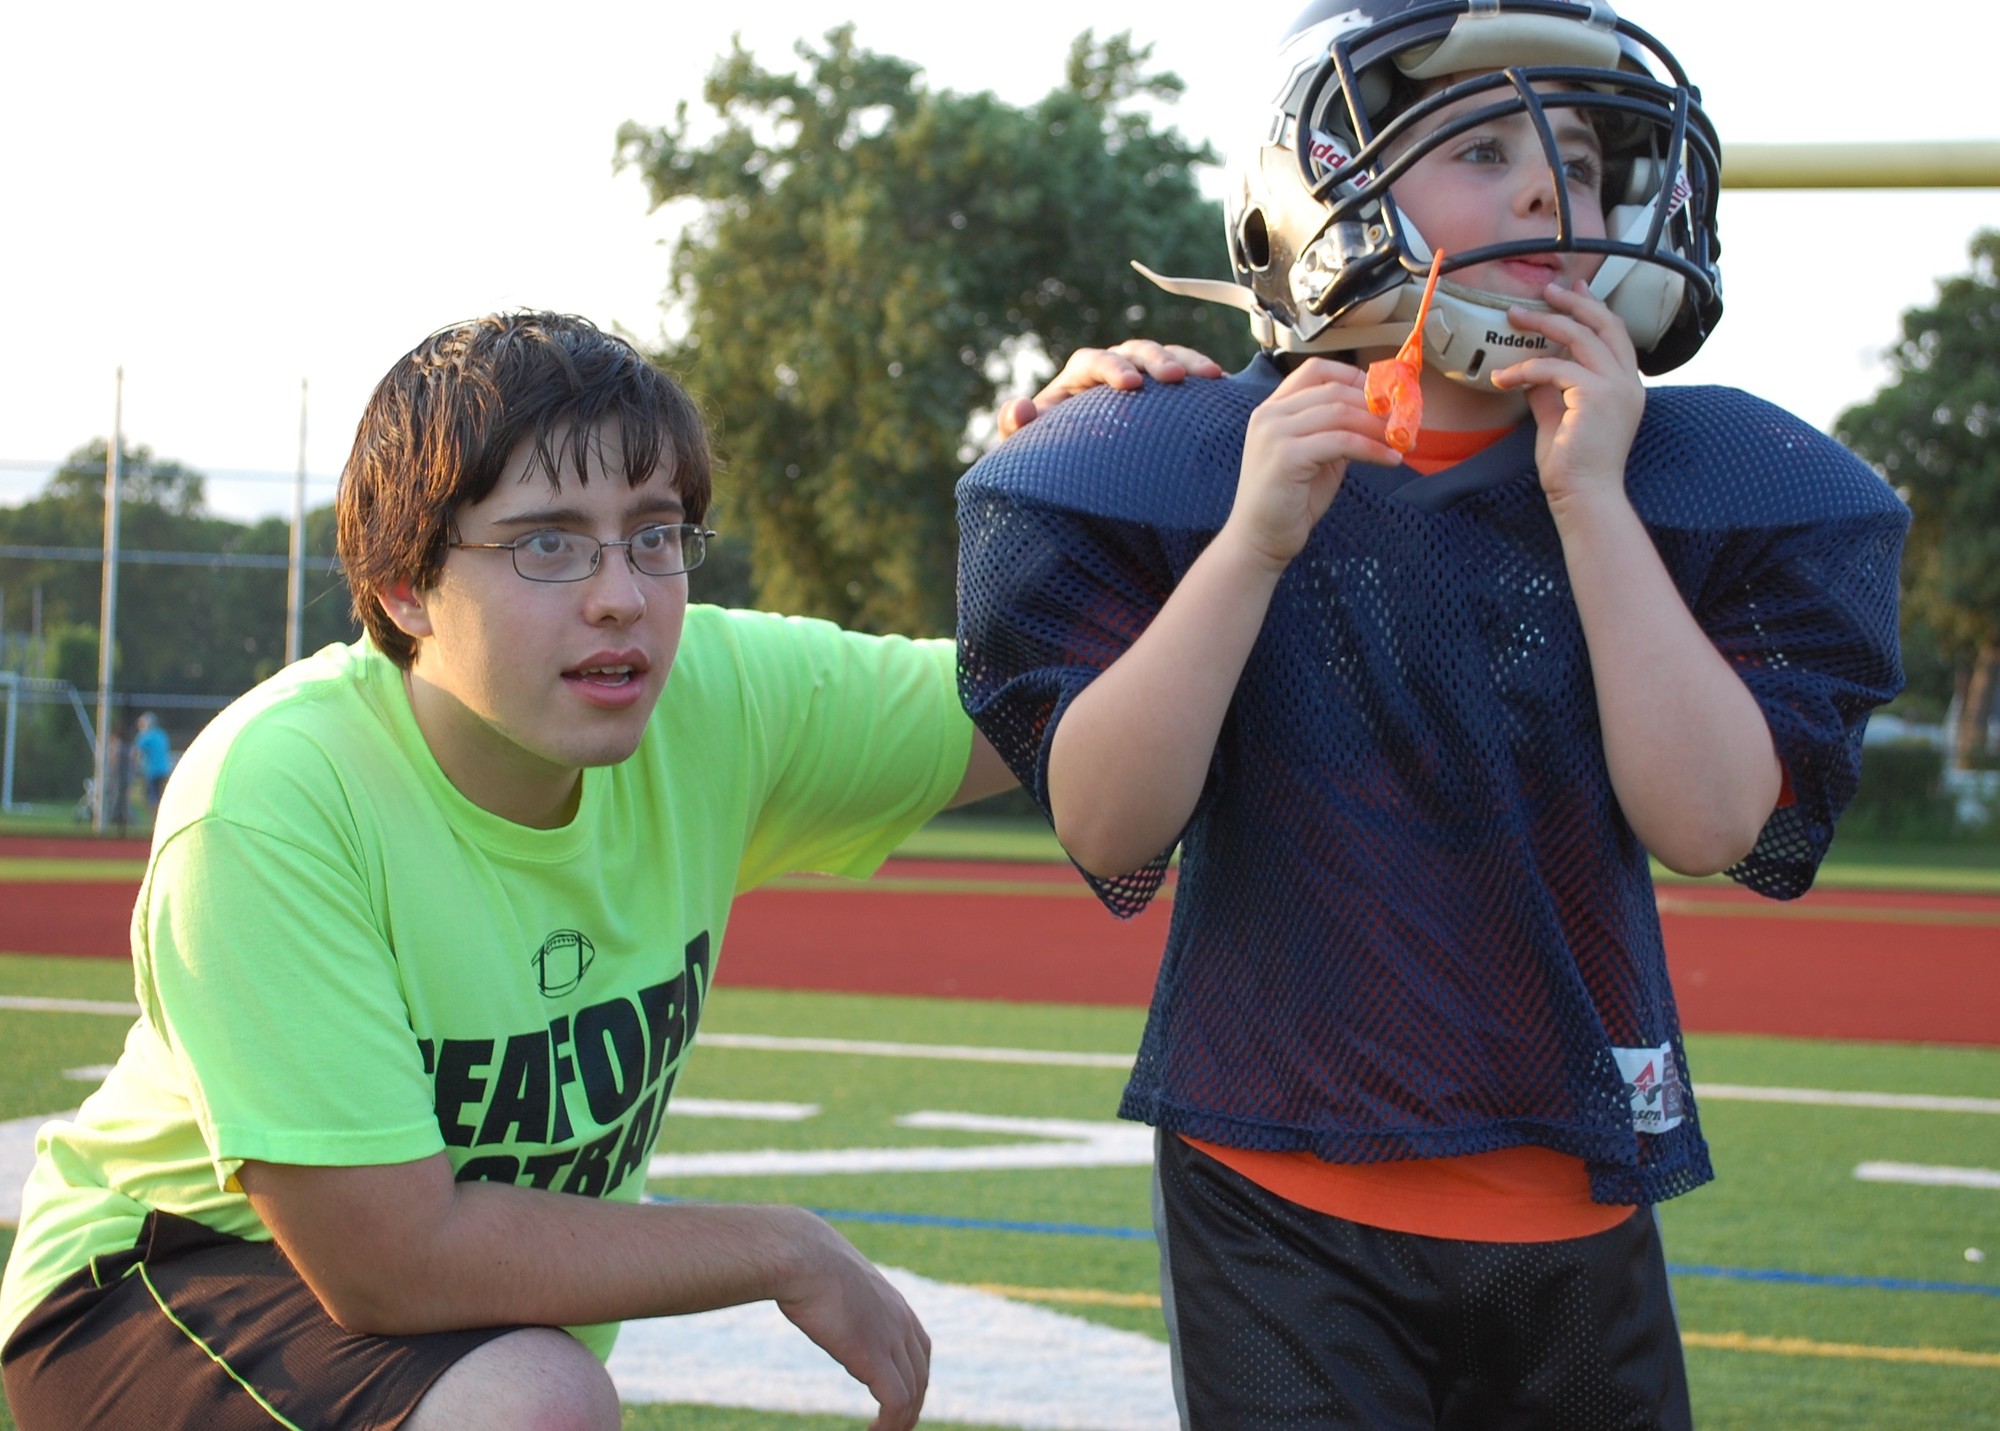 Senior Football player Dominick Porcelli gave some guidance to Matthew Schuh of the Broncos during one of the instructional drills.